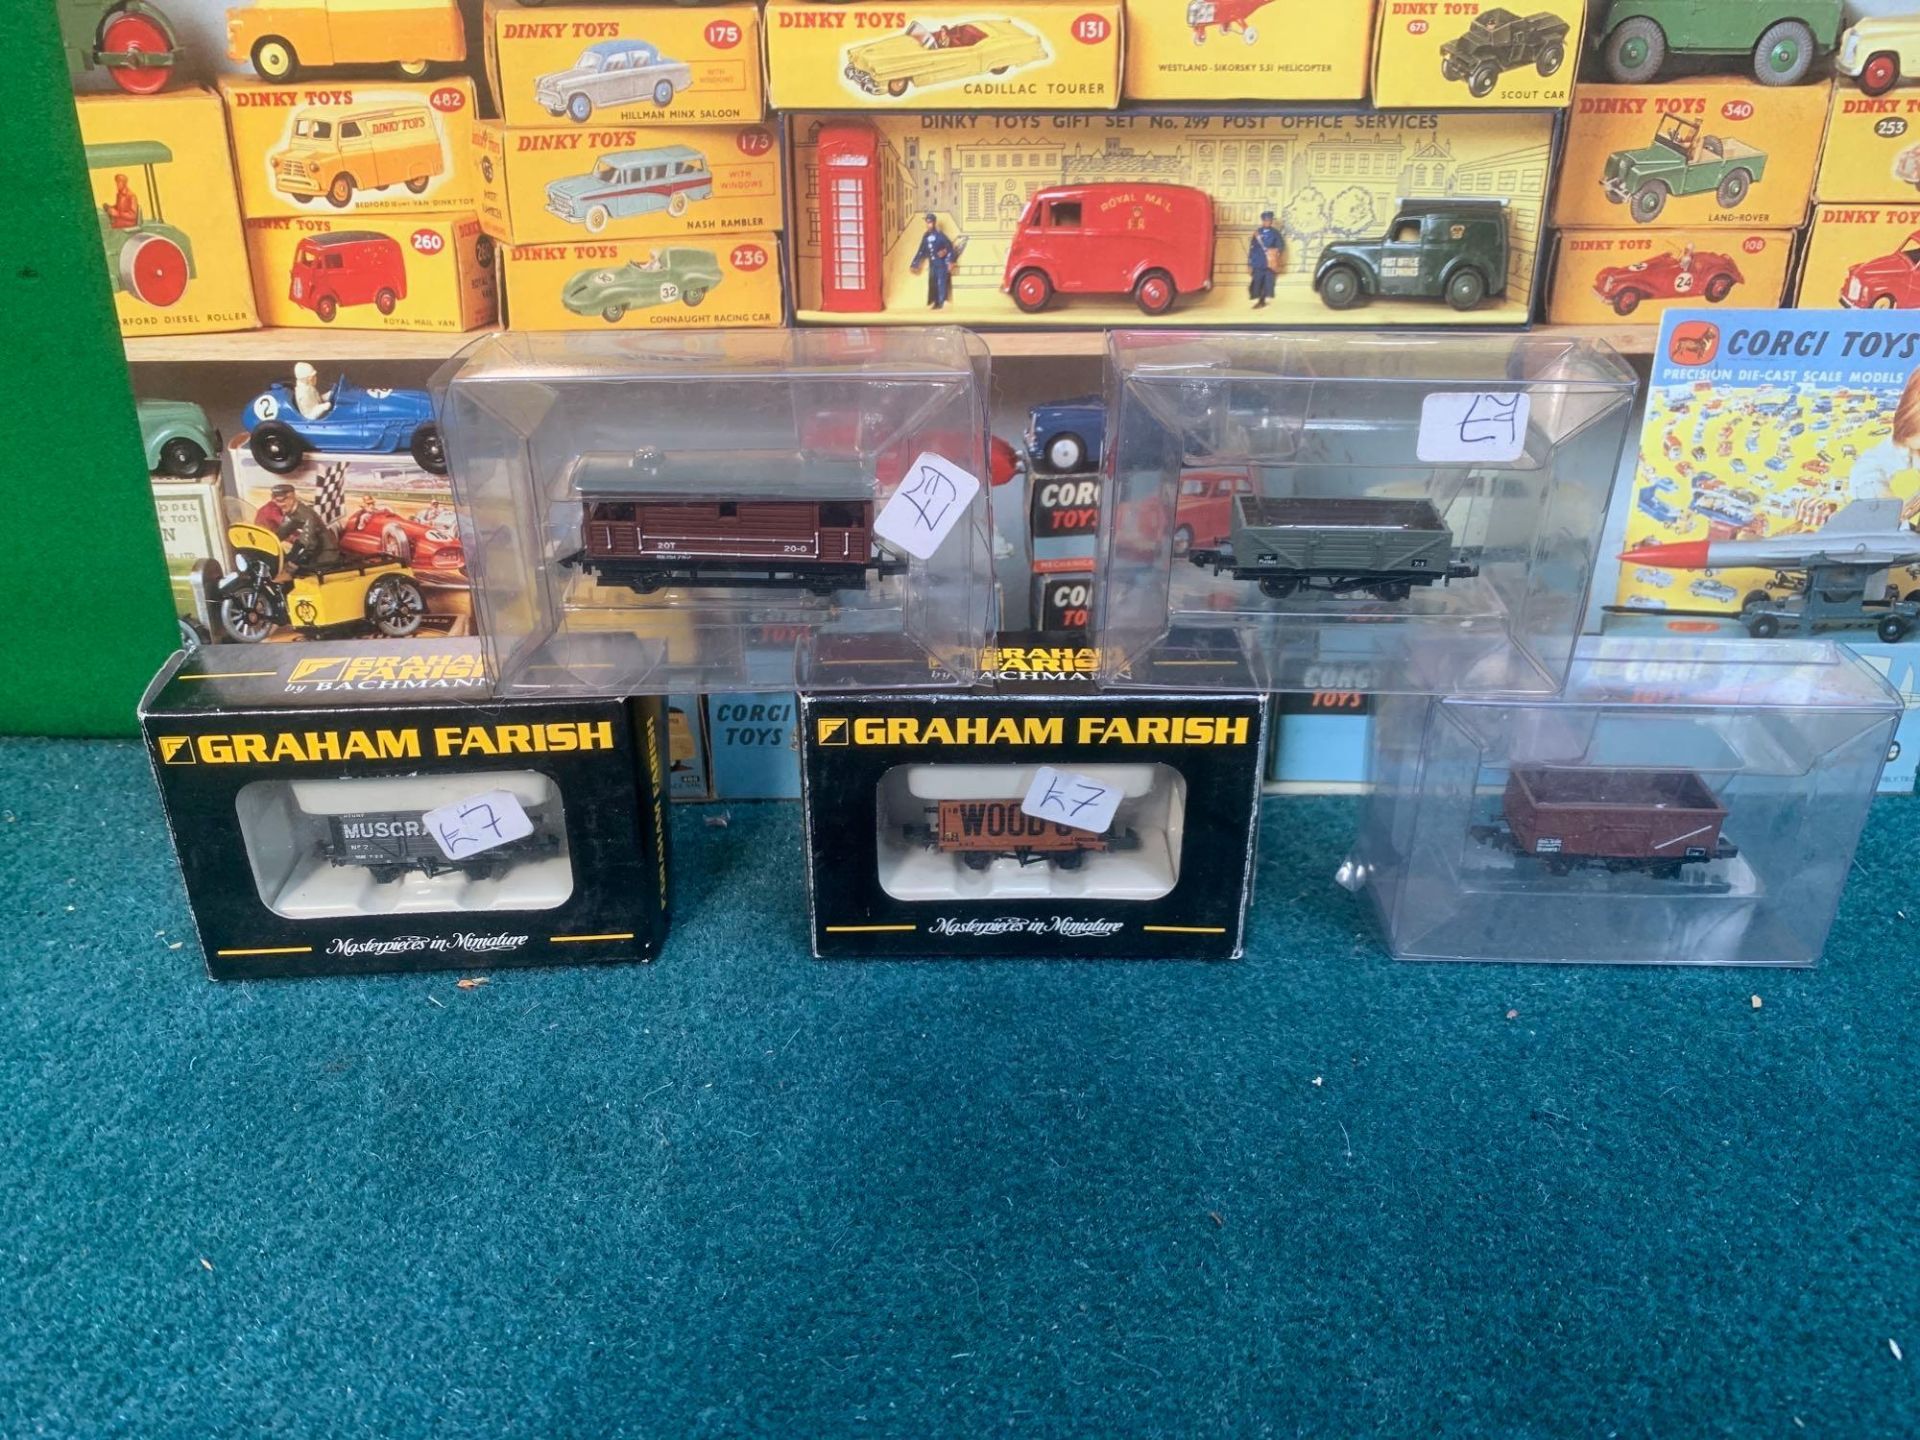 9 X Miniature Railway Models Includes Graham Farrish Models And PECO Models Carriageways Trains - Image 7 of 12